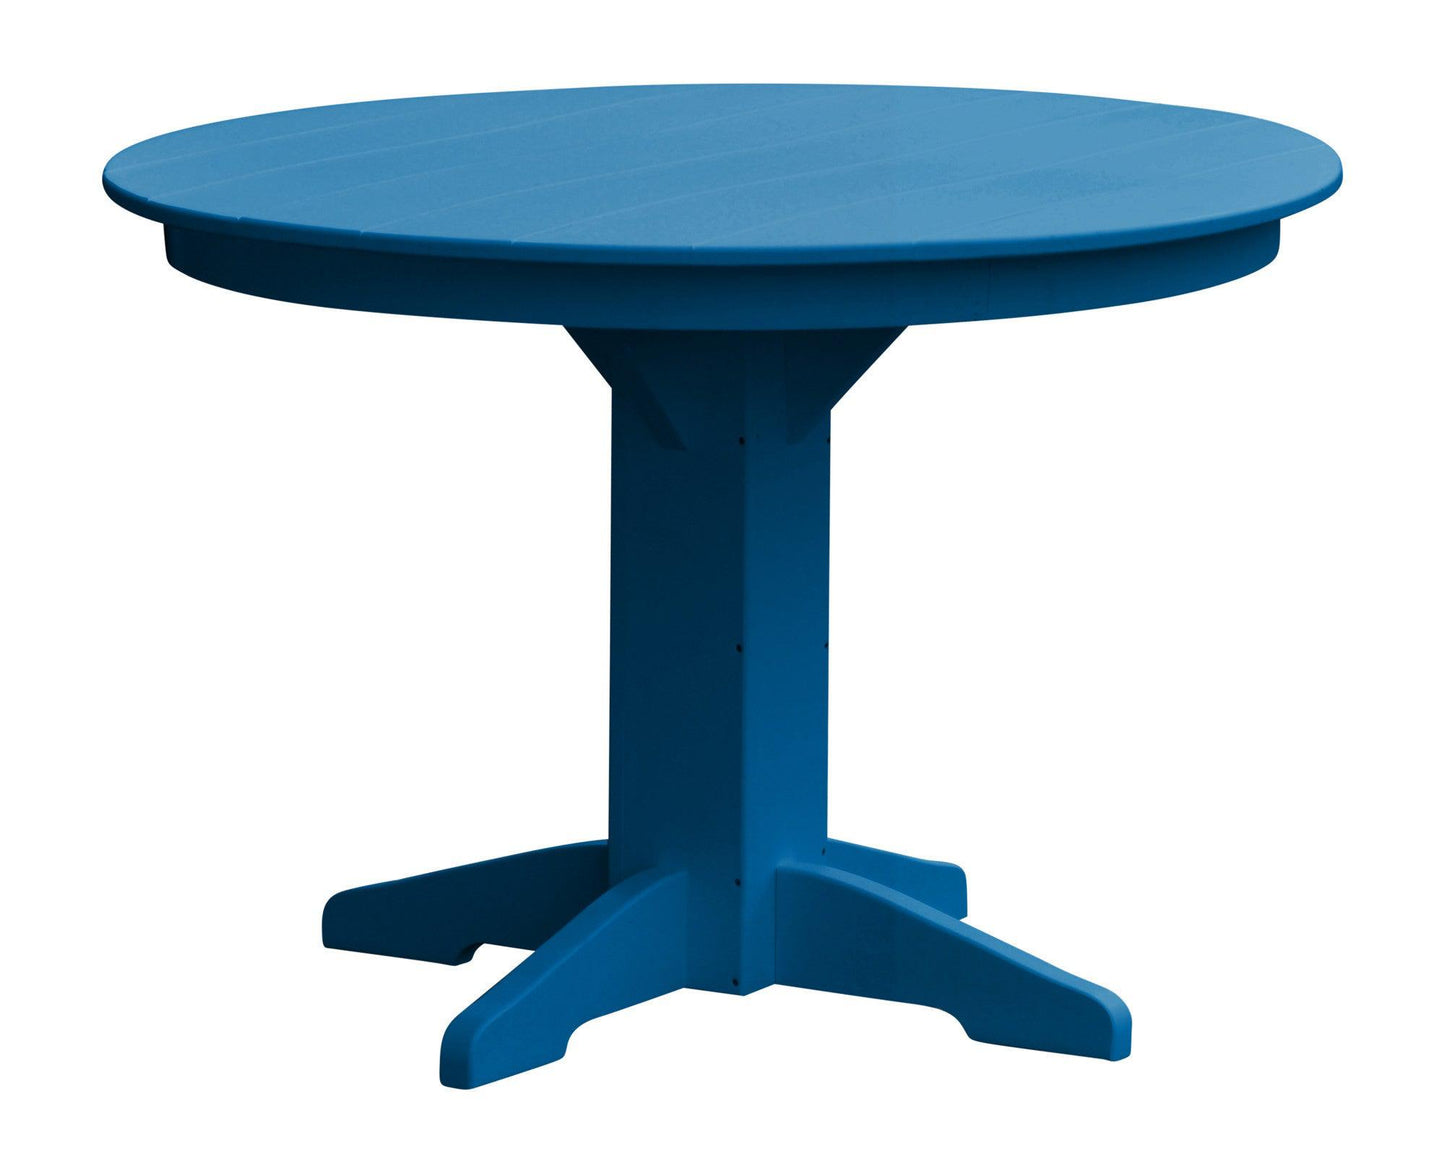 A&L Furniture Recycled Plastic 44" Round Dining Table - Blue